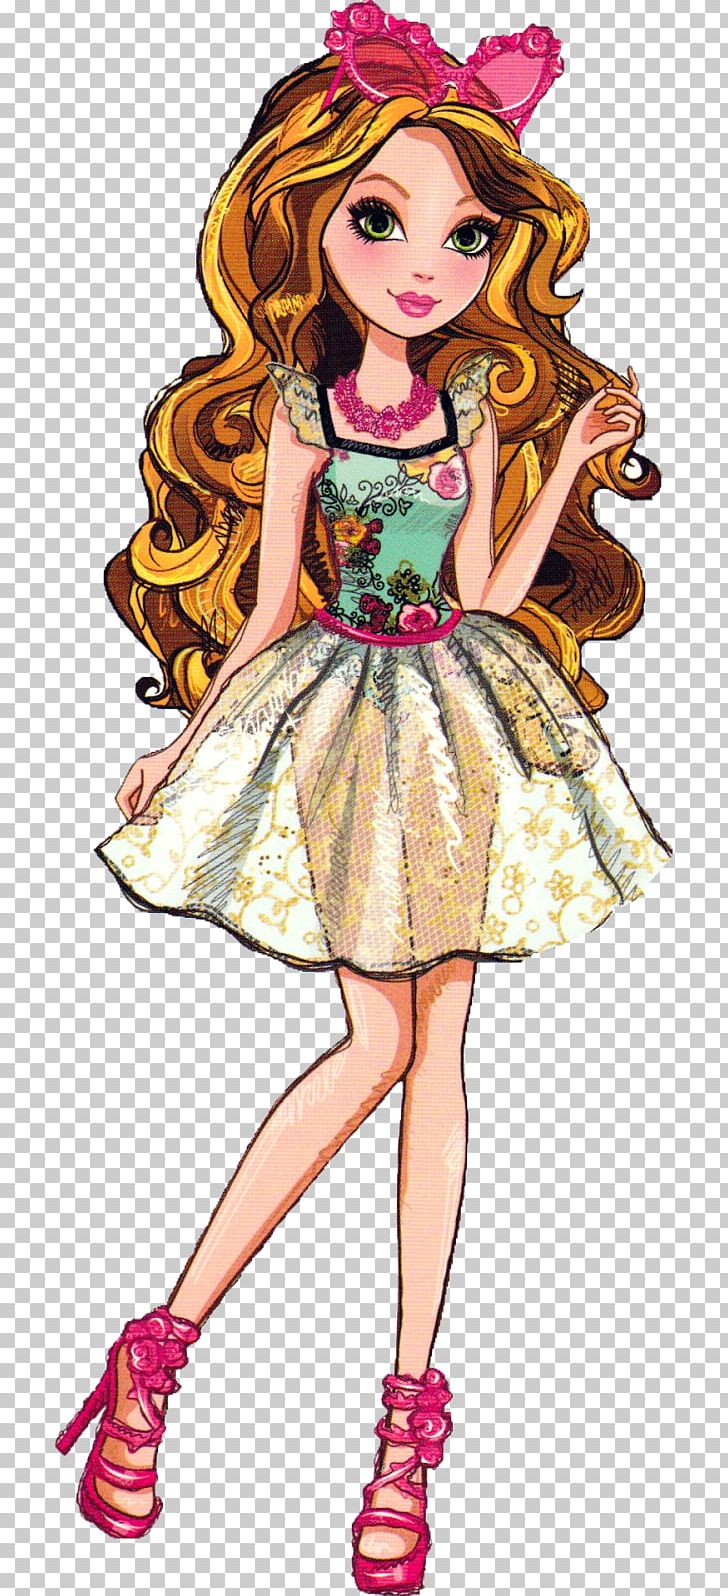 Ever After High Doll Queen Of Hearts PNG, Clipart, Anime, Art, Barbie, Brown Hair, Costume Free PNG Download